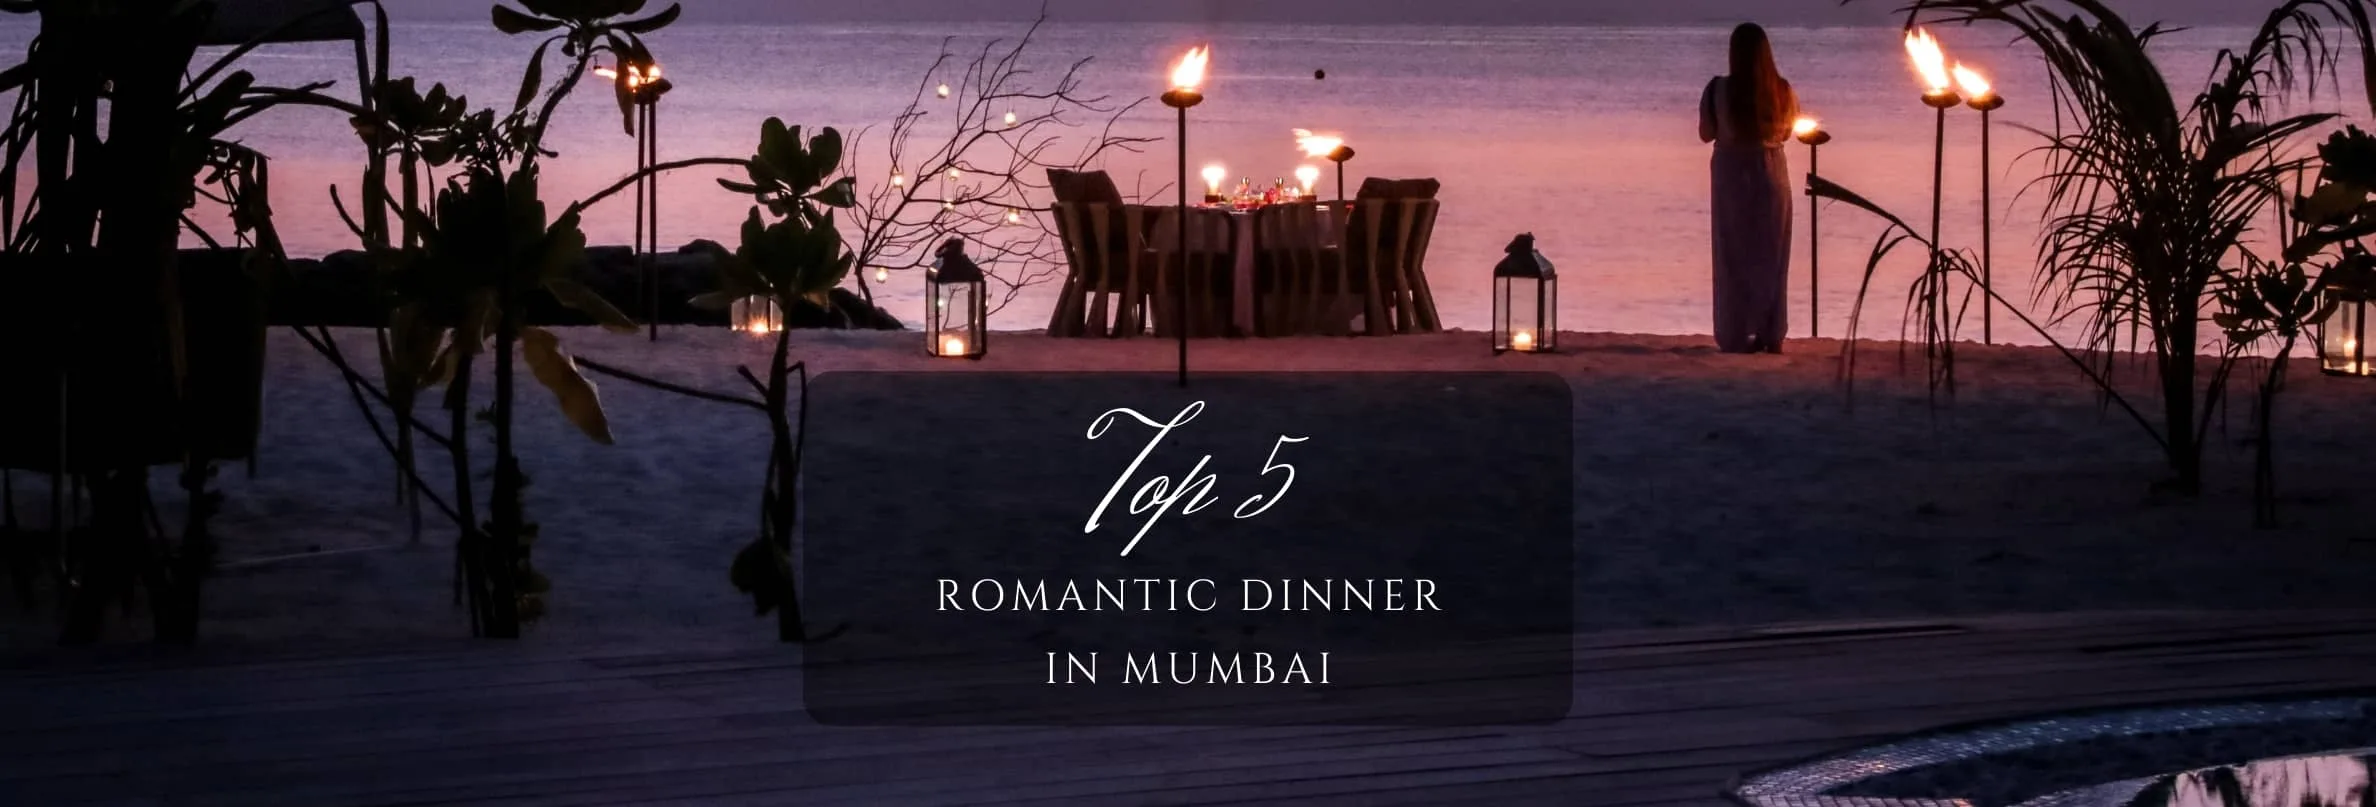 Top 5 Romantic Candlelight Dinner Packages For Couples In Mumbai.